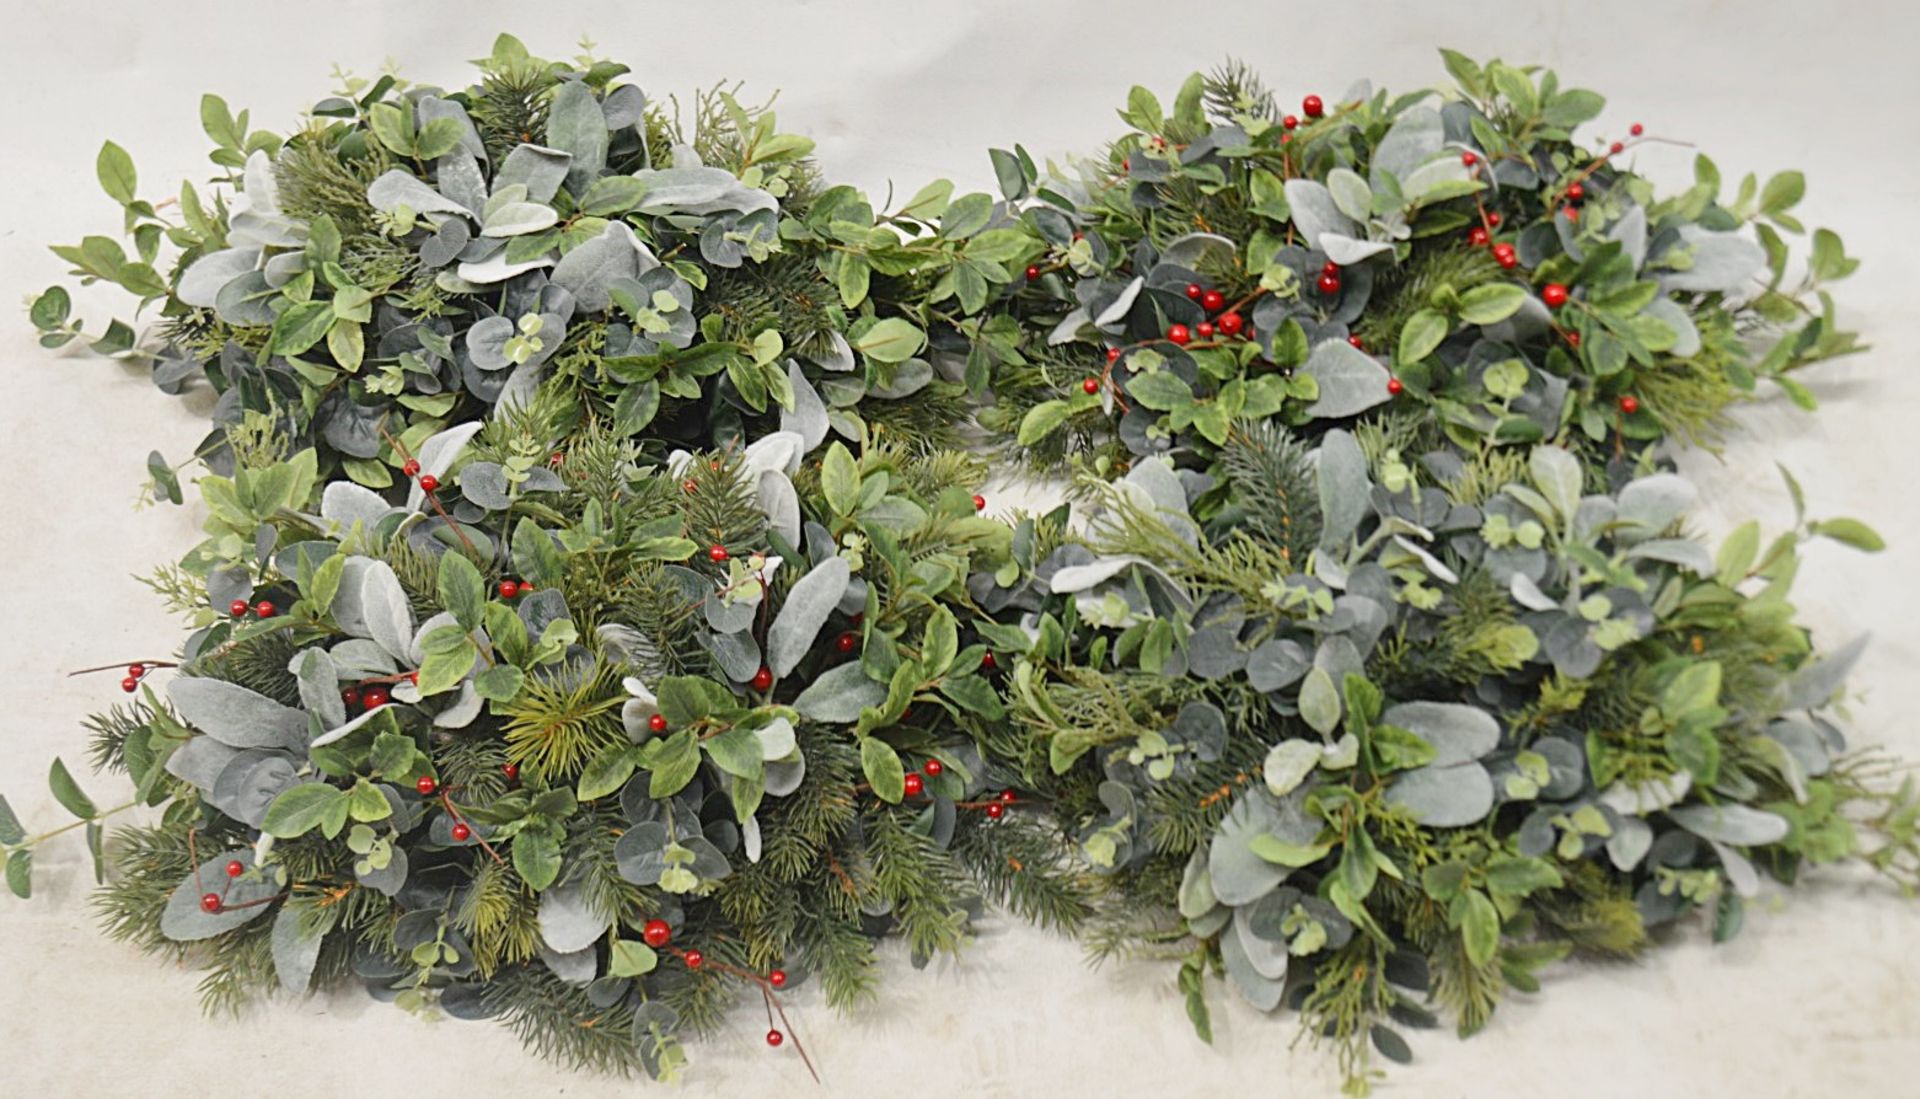 4 x Commercial Decorative Christmas Wreaths - Variety As Shown - Dimensions: 50 x 30cm - Ex-